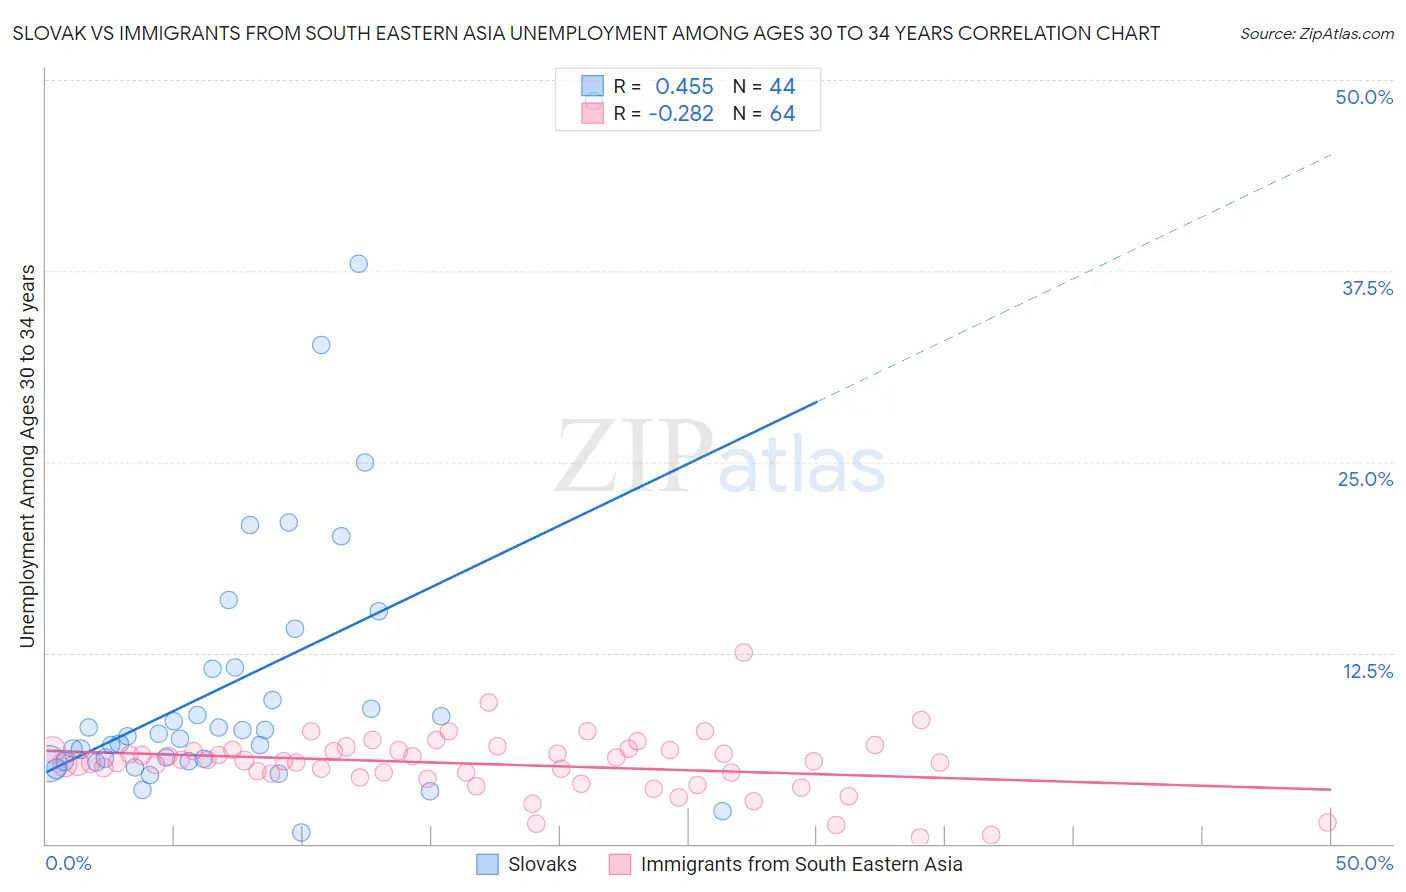 Slovak vs Immigrants from South Eastern Asia Unemployment Among Ages 30 to 34 years